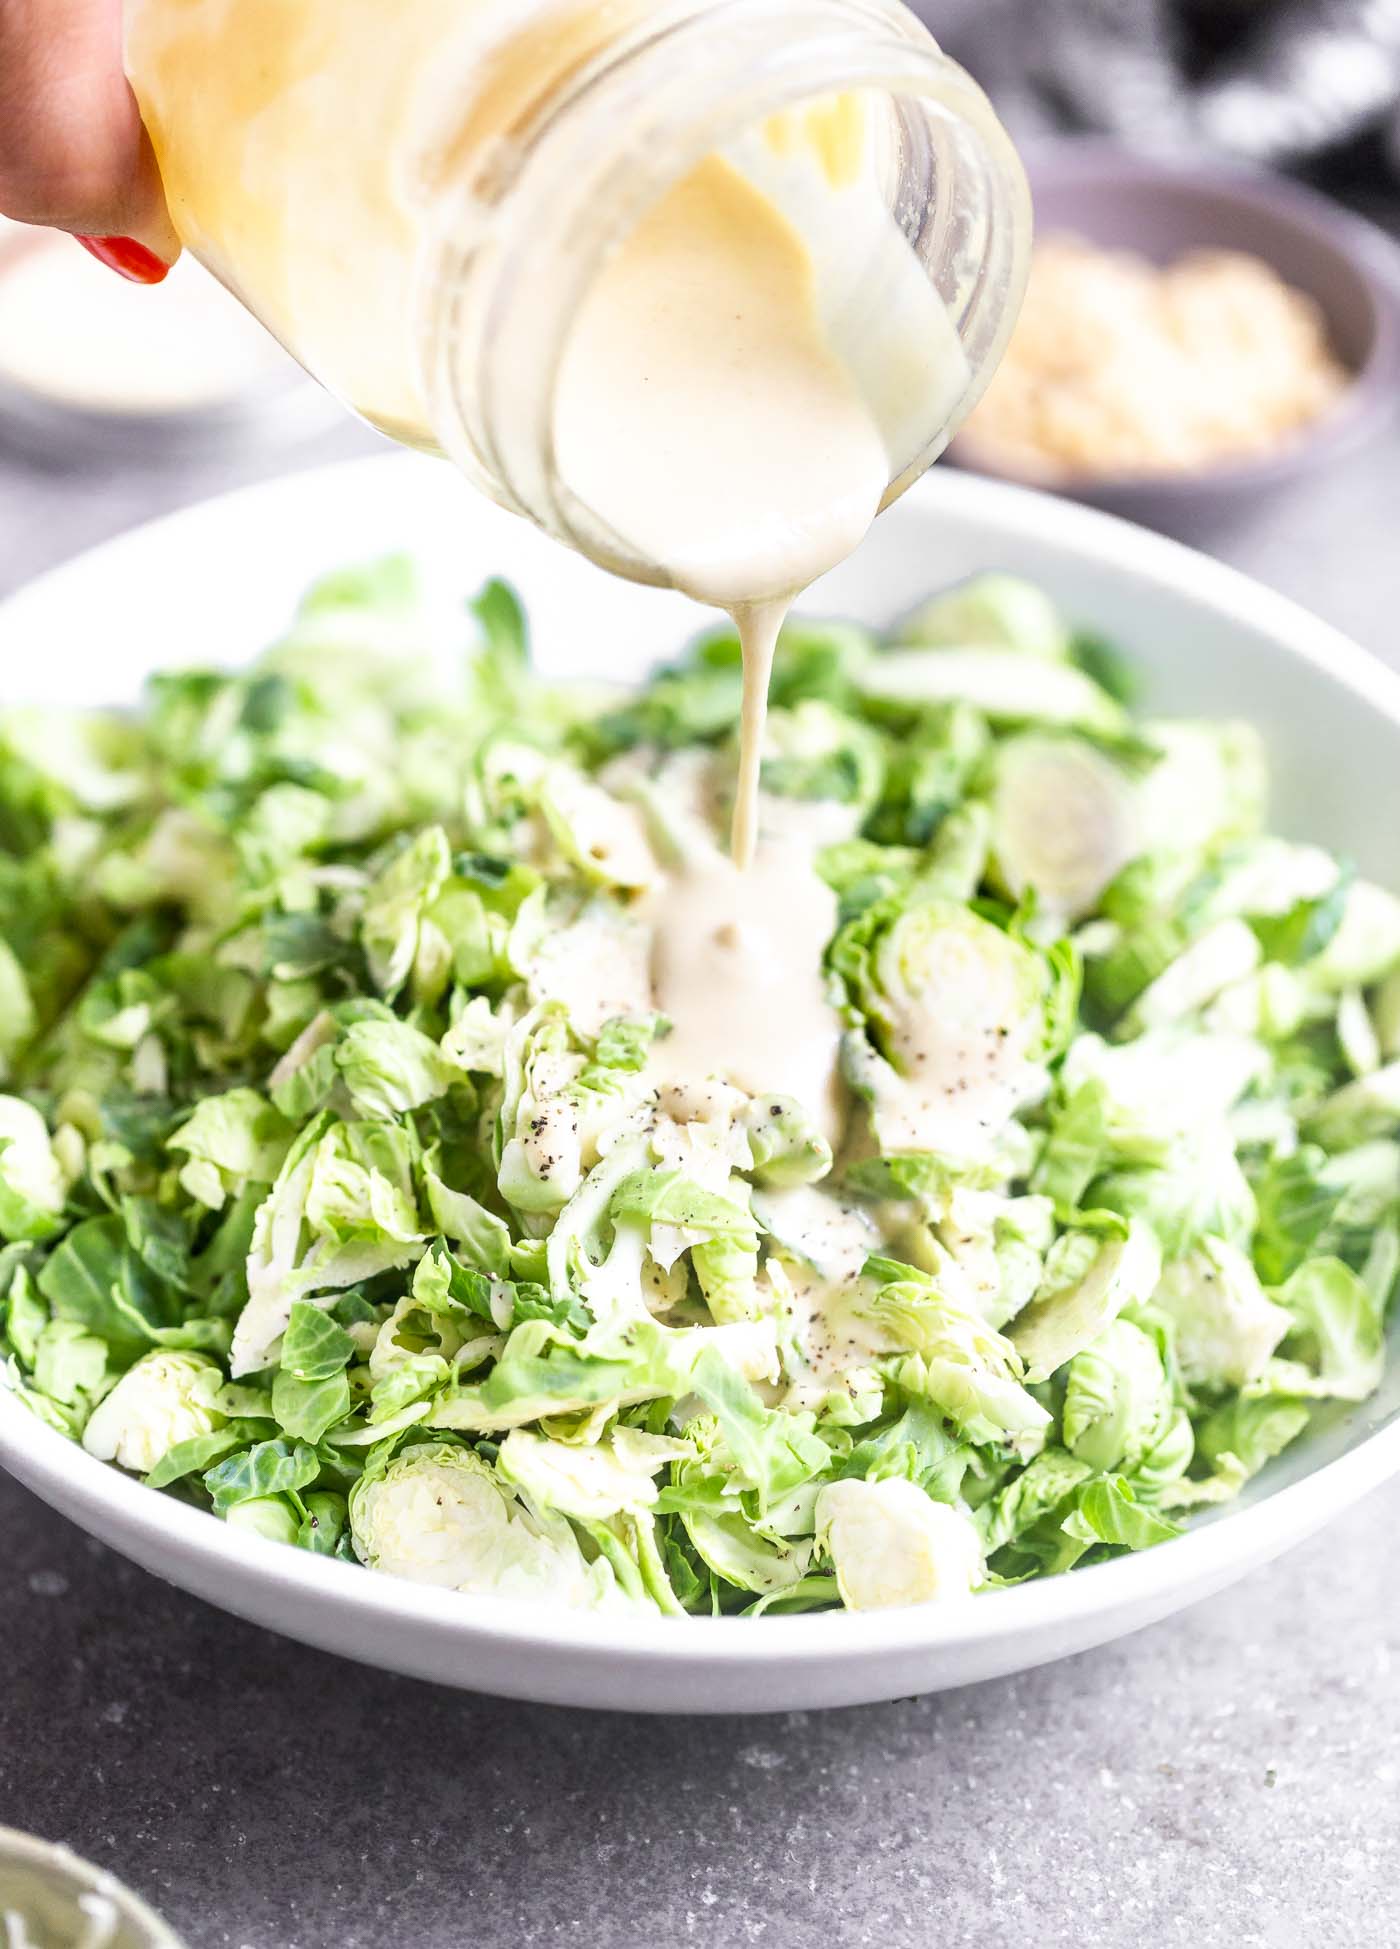 This 5-Ingredient Tahini Maple Dressing is our very favorite healthy salad dressing that goes with EVERYTHING. It's nutty, sweet, acidic, and the perfect balance of flavors. Make a big batch in a mason jar and store in the fridge for weeks! 